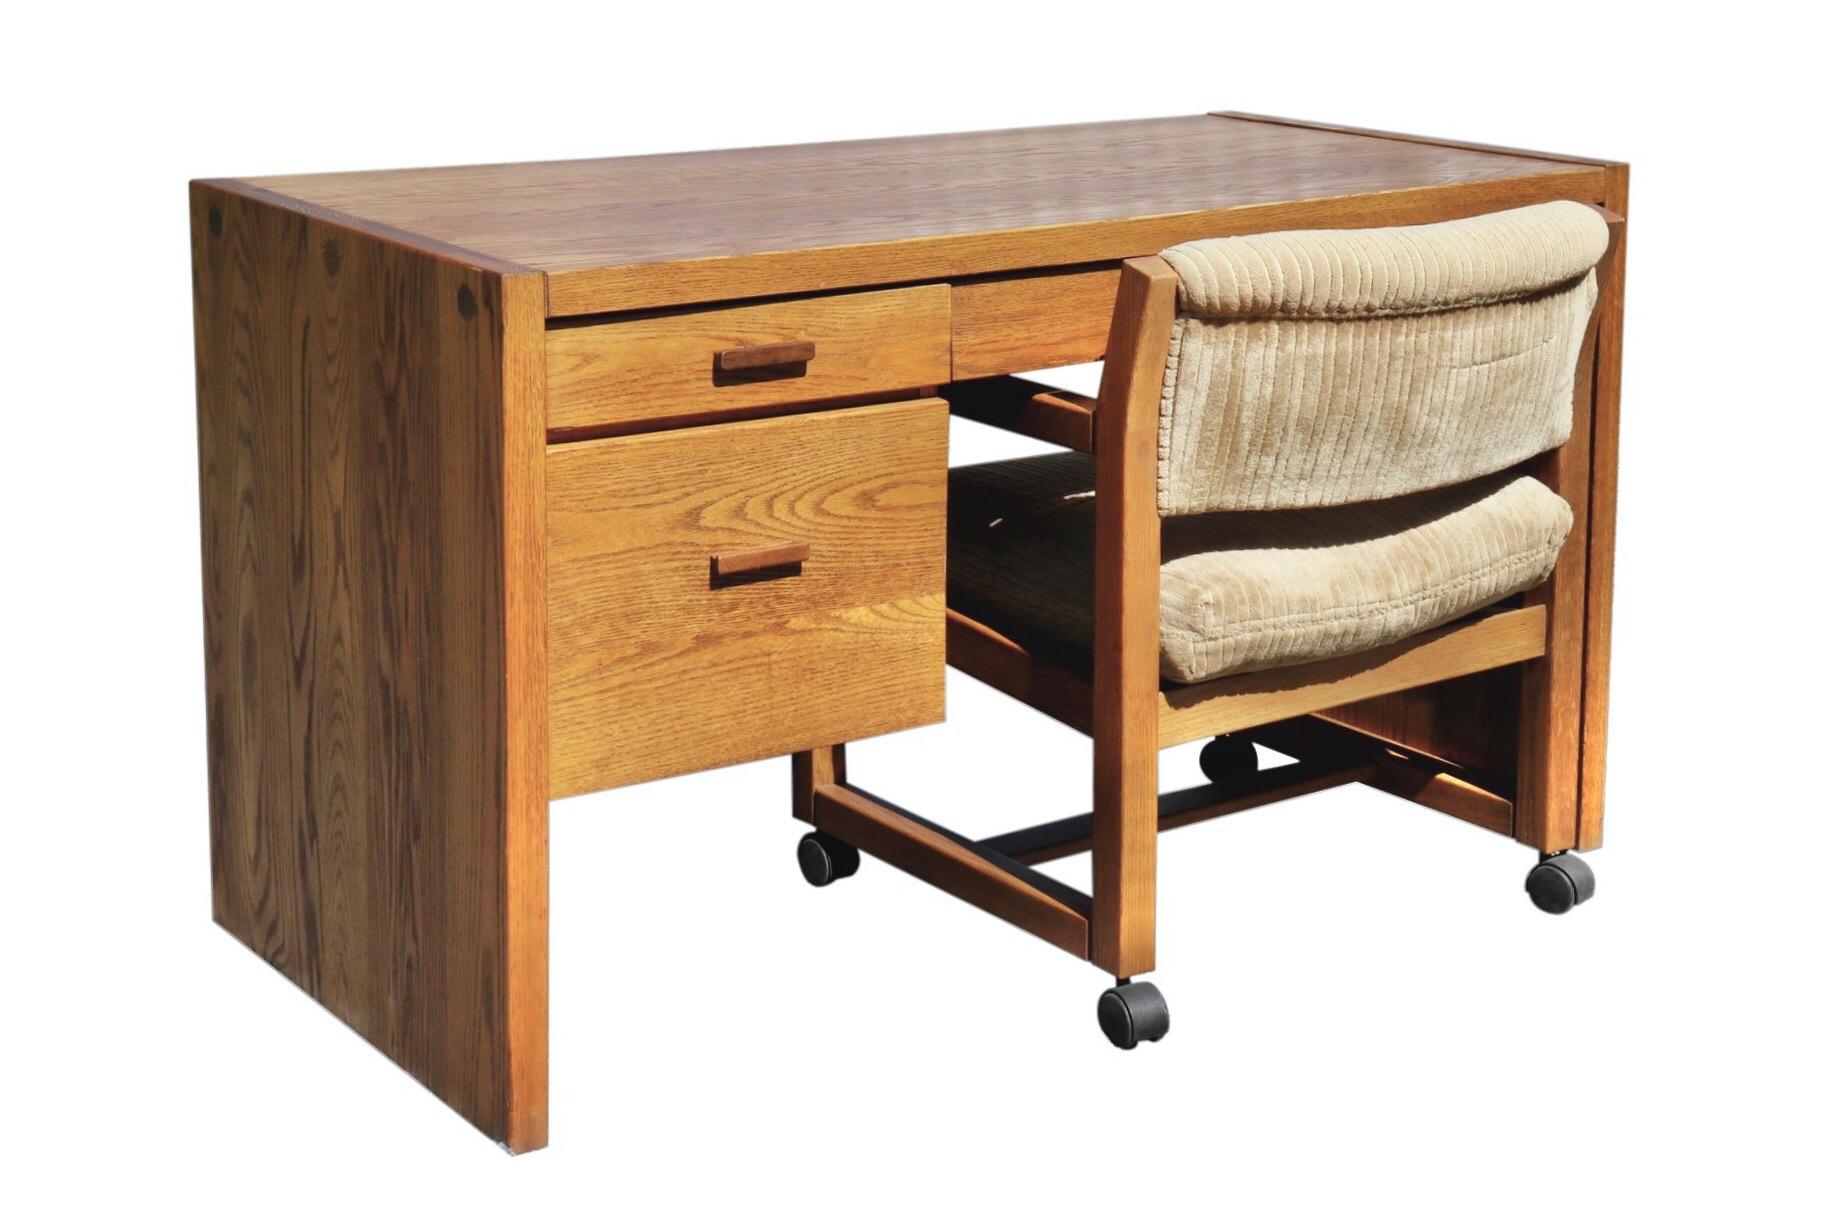 A mid century writing desk and matching chair made by Conant Ball. Made of solid ash with beautiful grain. Sleek lines throughout with three simple drawers and waterfall sides. The desk chair has open arms that fit neatly underneath the desk. The